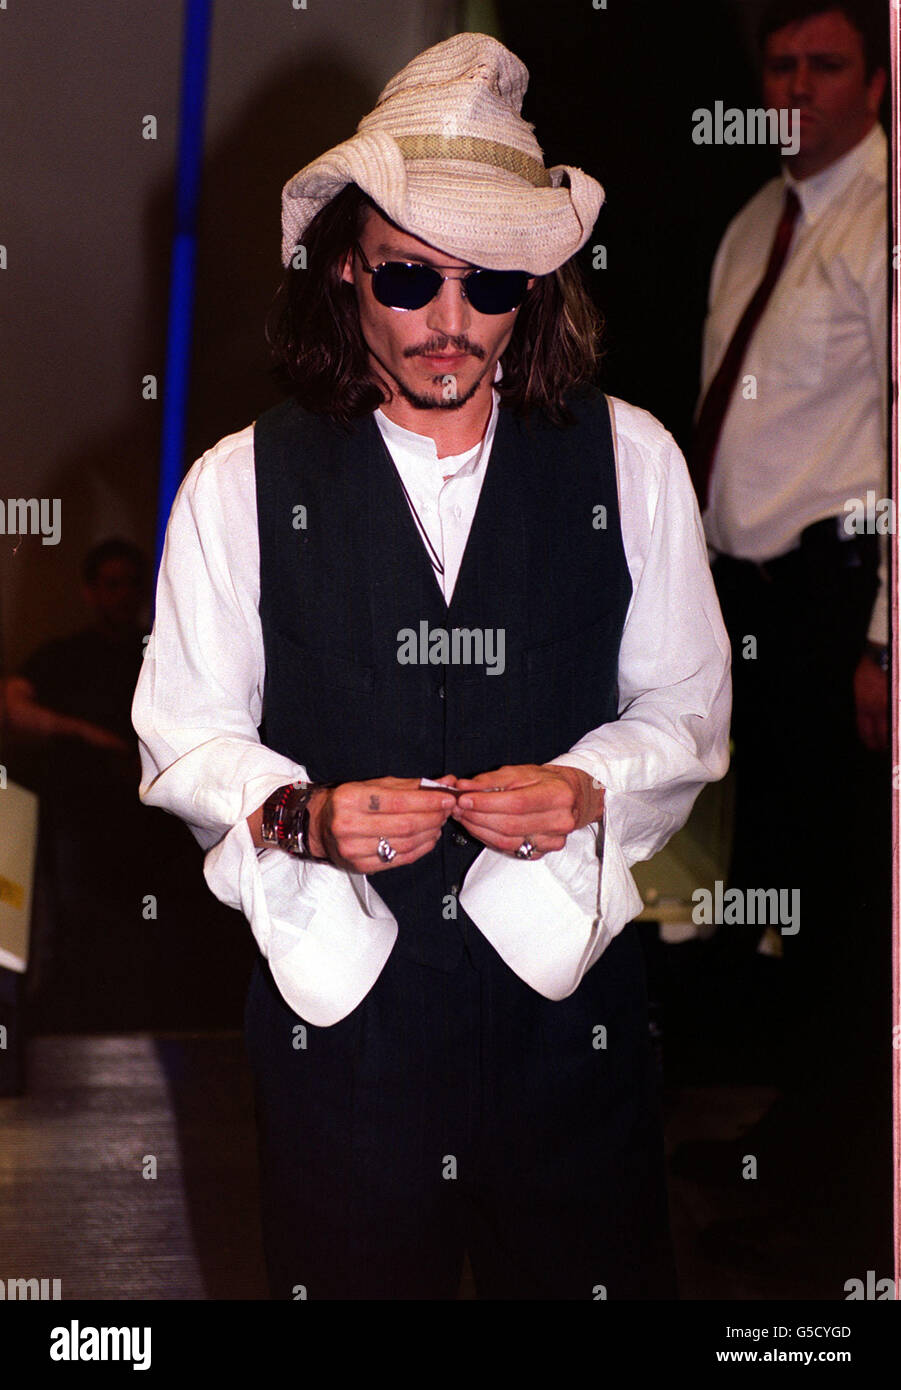 Actor Johnny Depp, 37, rolls a cigarette as he arrives for the premiere of his latest film Blow, based on the true story of a notorious drug smuggler, in London's Leicester Square. * To perfect his role as cocaine importer George Jung, Depp met up with the shady character who helped to flood the US with the drug in the 1970s. The film opens across the UK on May 25, 2001. Stock Photo